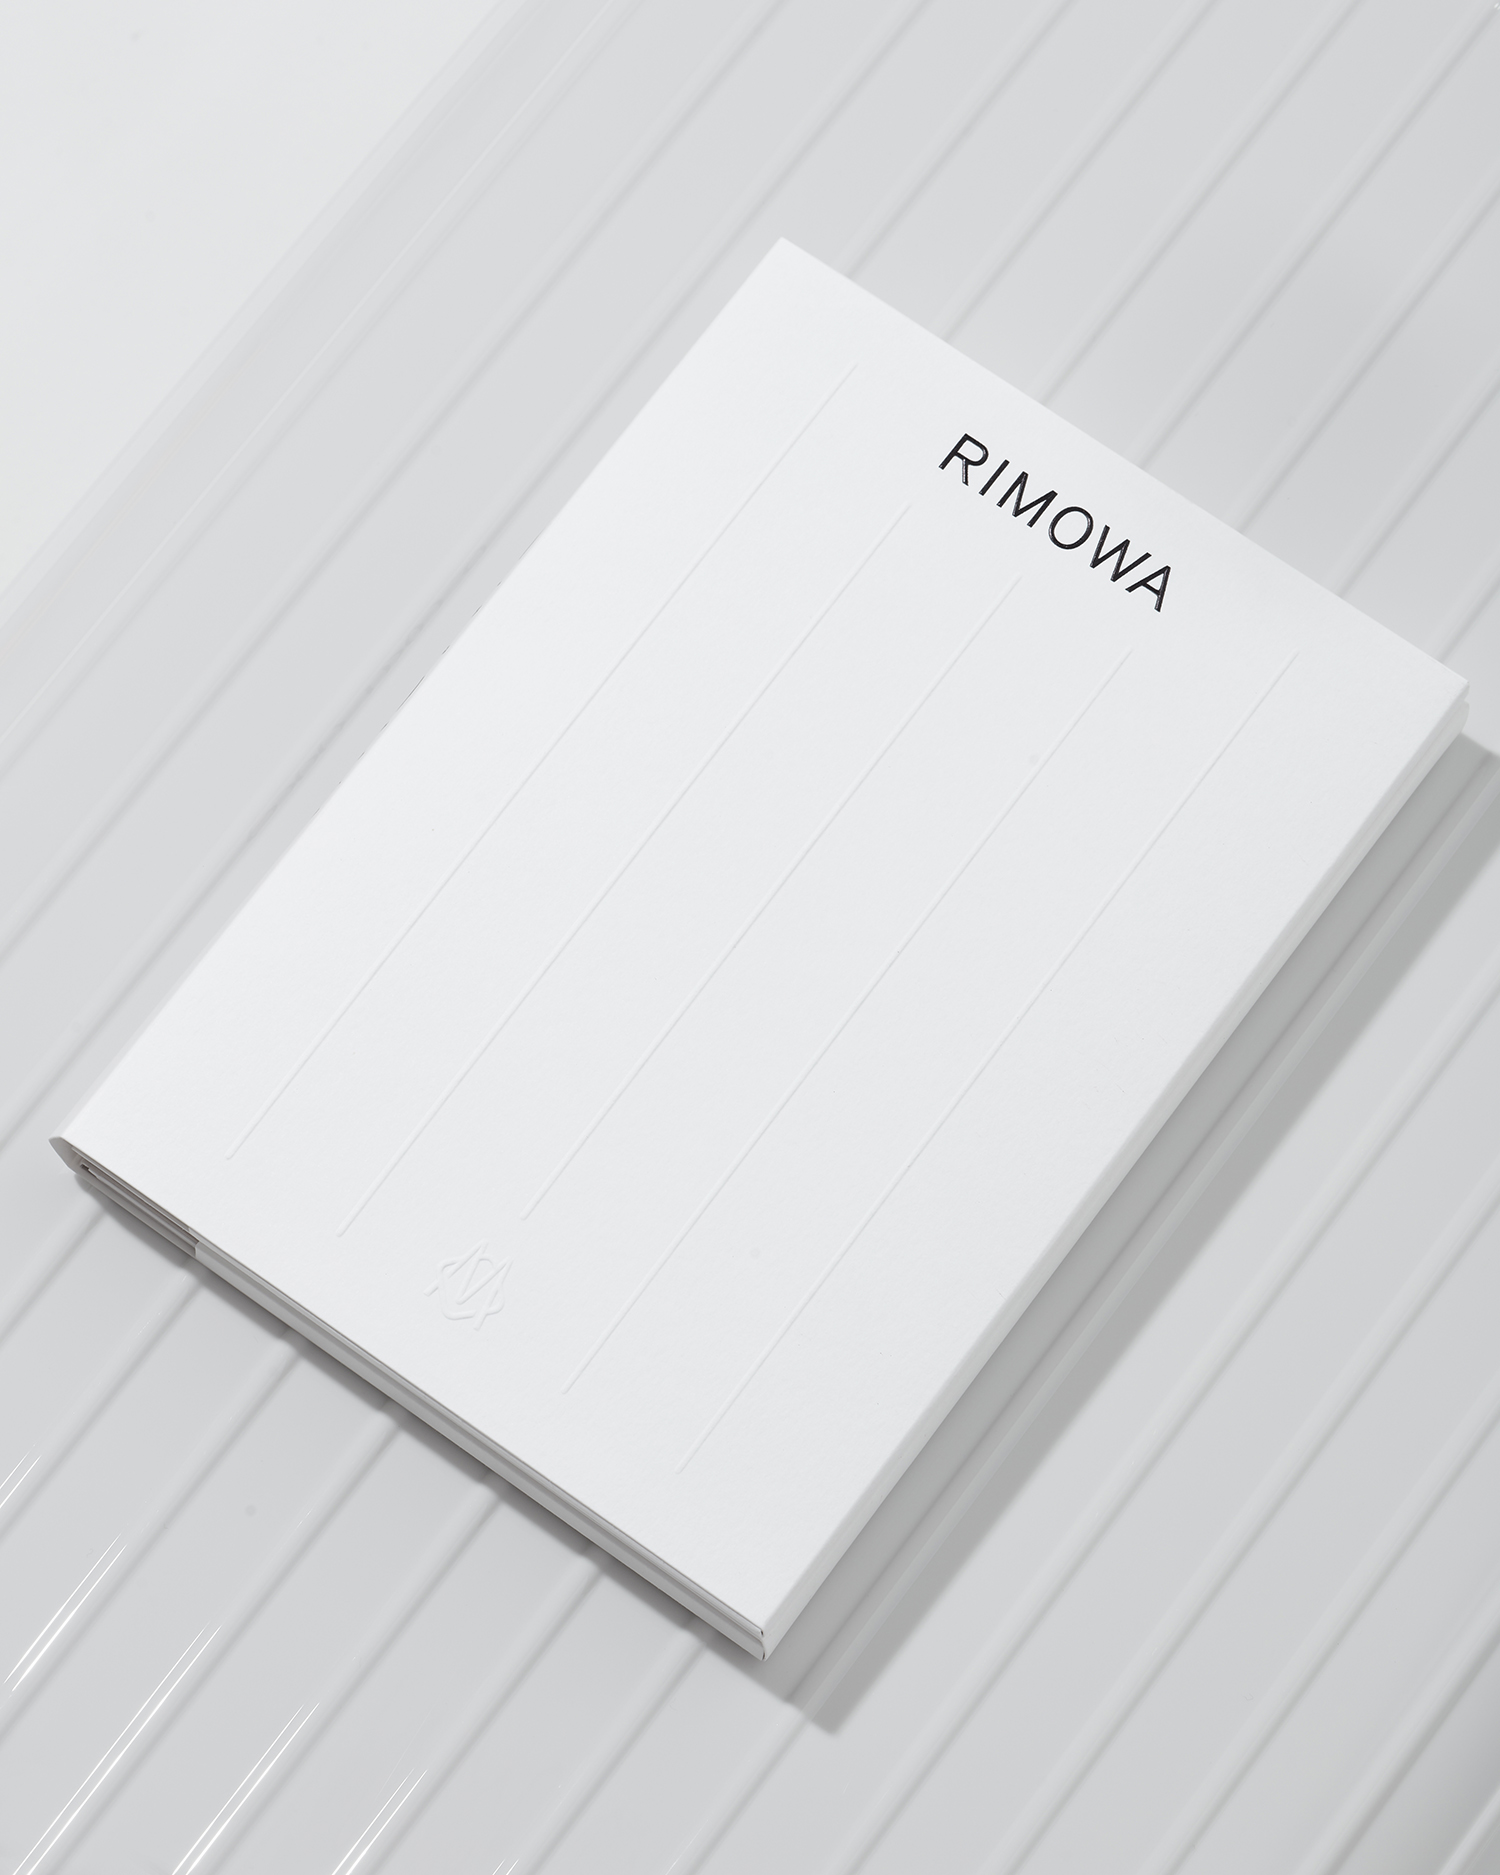 Graphic identity and embossed folder by Commission studio for functional luxury luggage manufacturer Rimowa